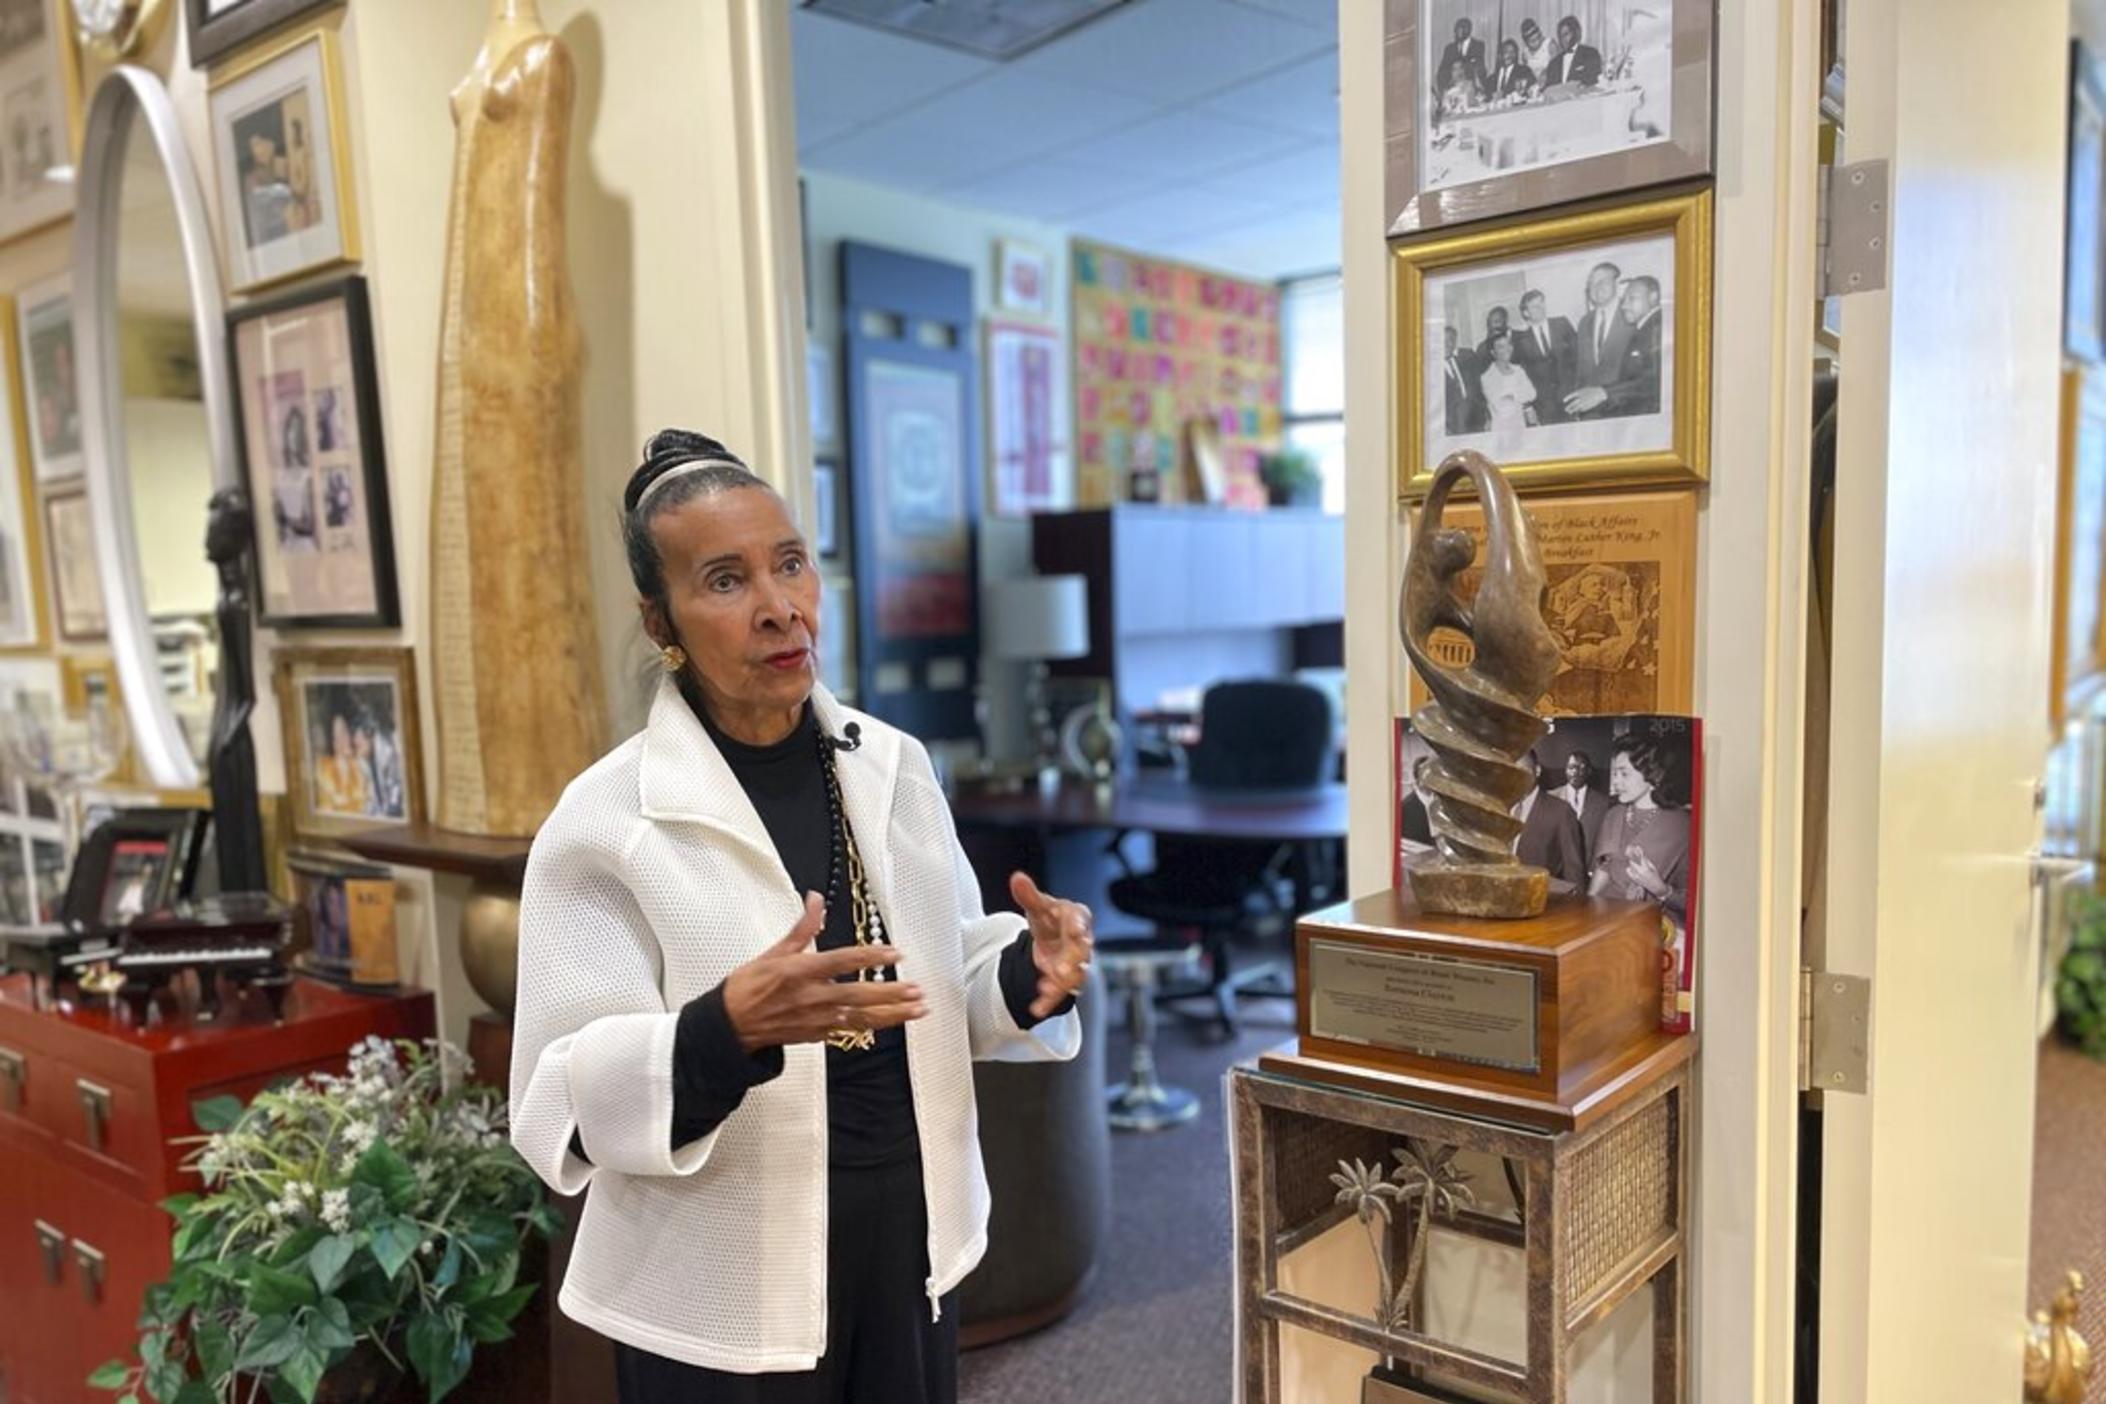 Xernona Clayton, a key aide to Martin Luther King Jr. and Coretta Scott King who helped sustain the civil rights movement in the 1960s, is interviewed in her offices at the Trumpet Foundation in Atlanta, on June 3, 2022.